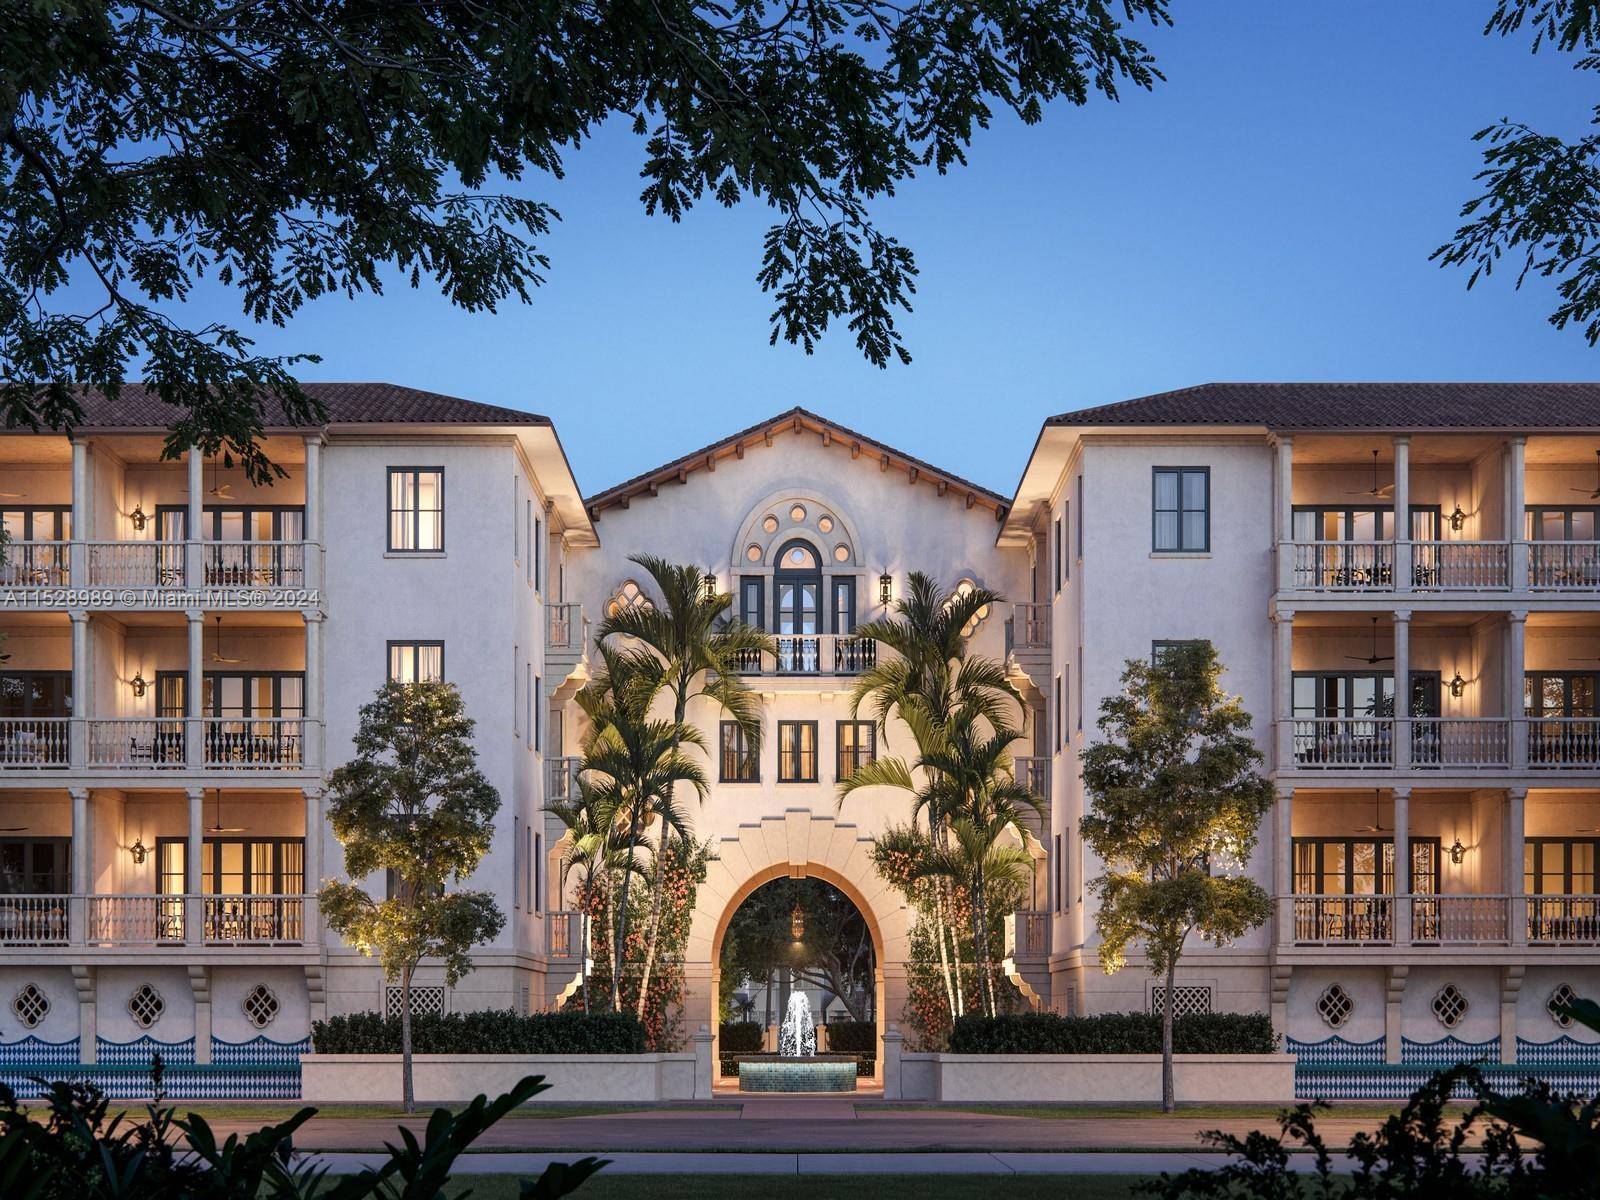 Introducing the Flats at Coral Gables most exclusive new Village known as The Village at Coral Gables.